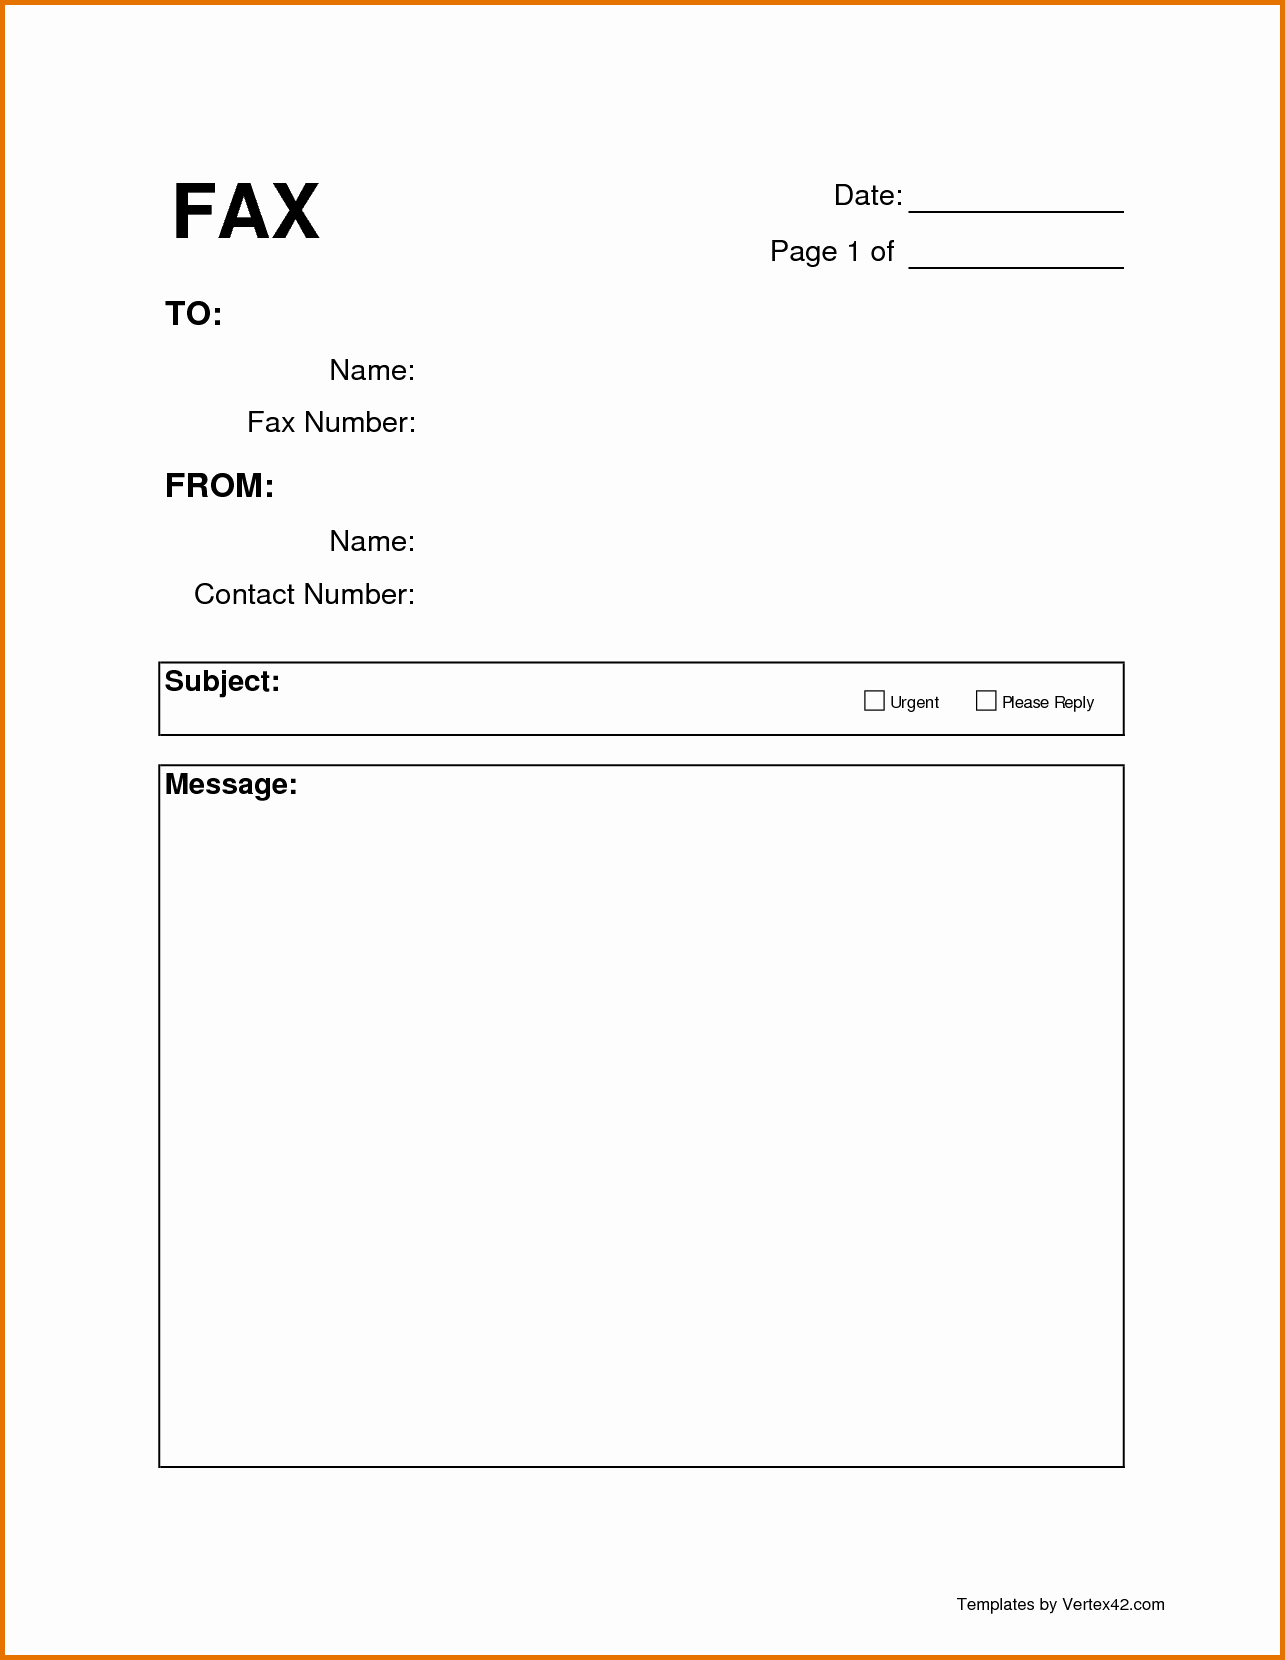 Cover Sheet for A Fax Inspirational 4 Printable Fax Cover Sheetsreference Letters Words